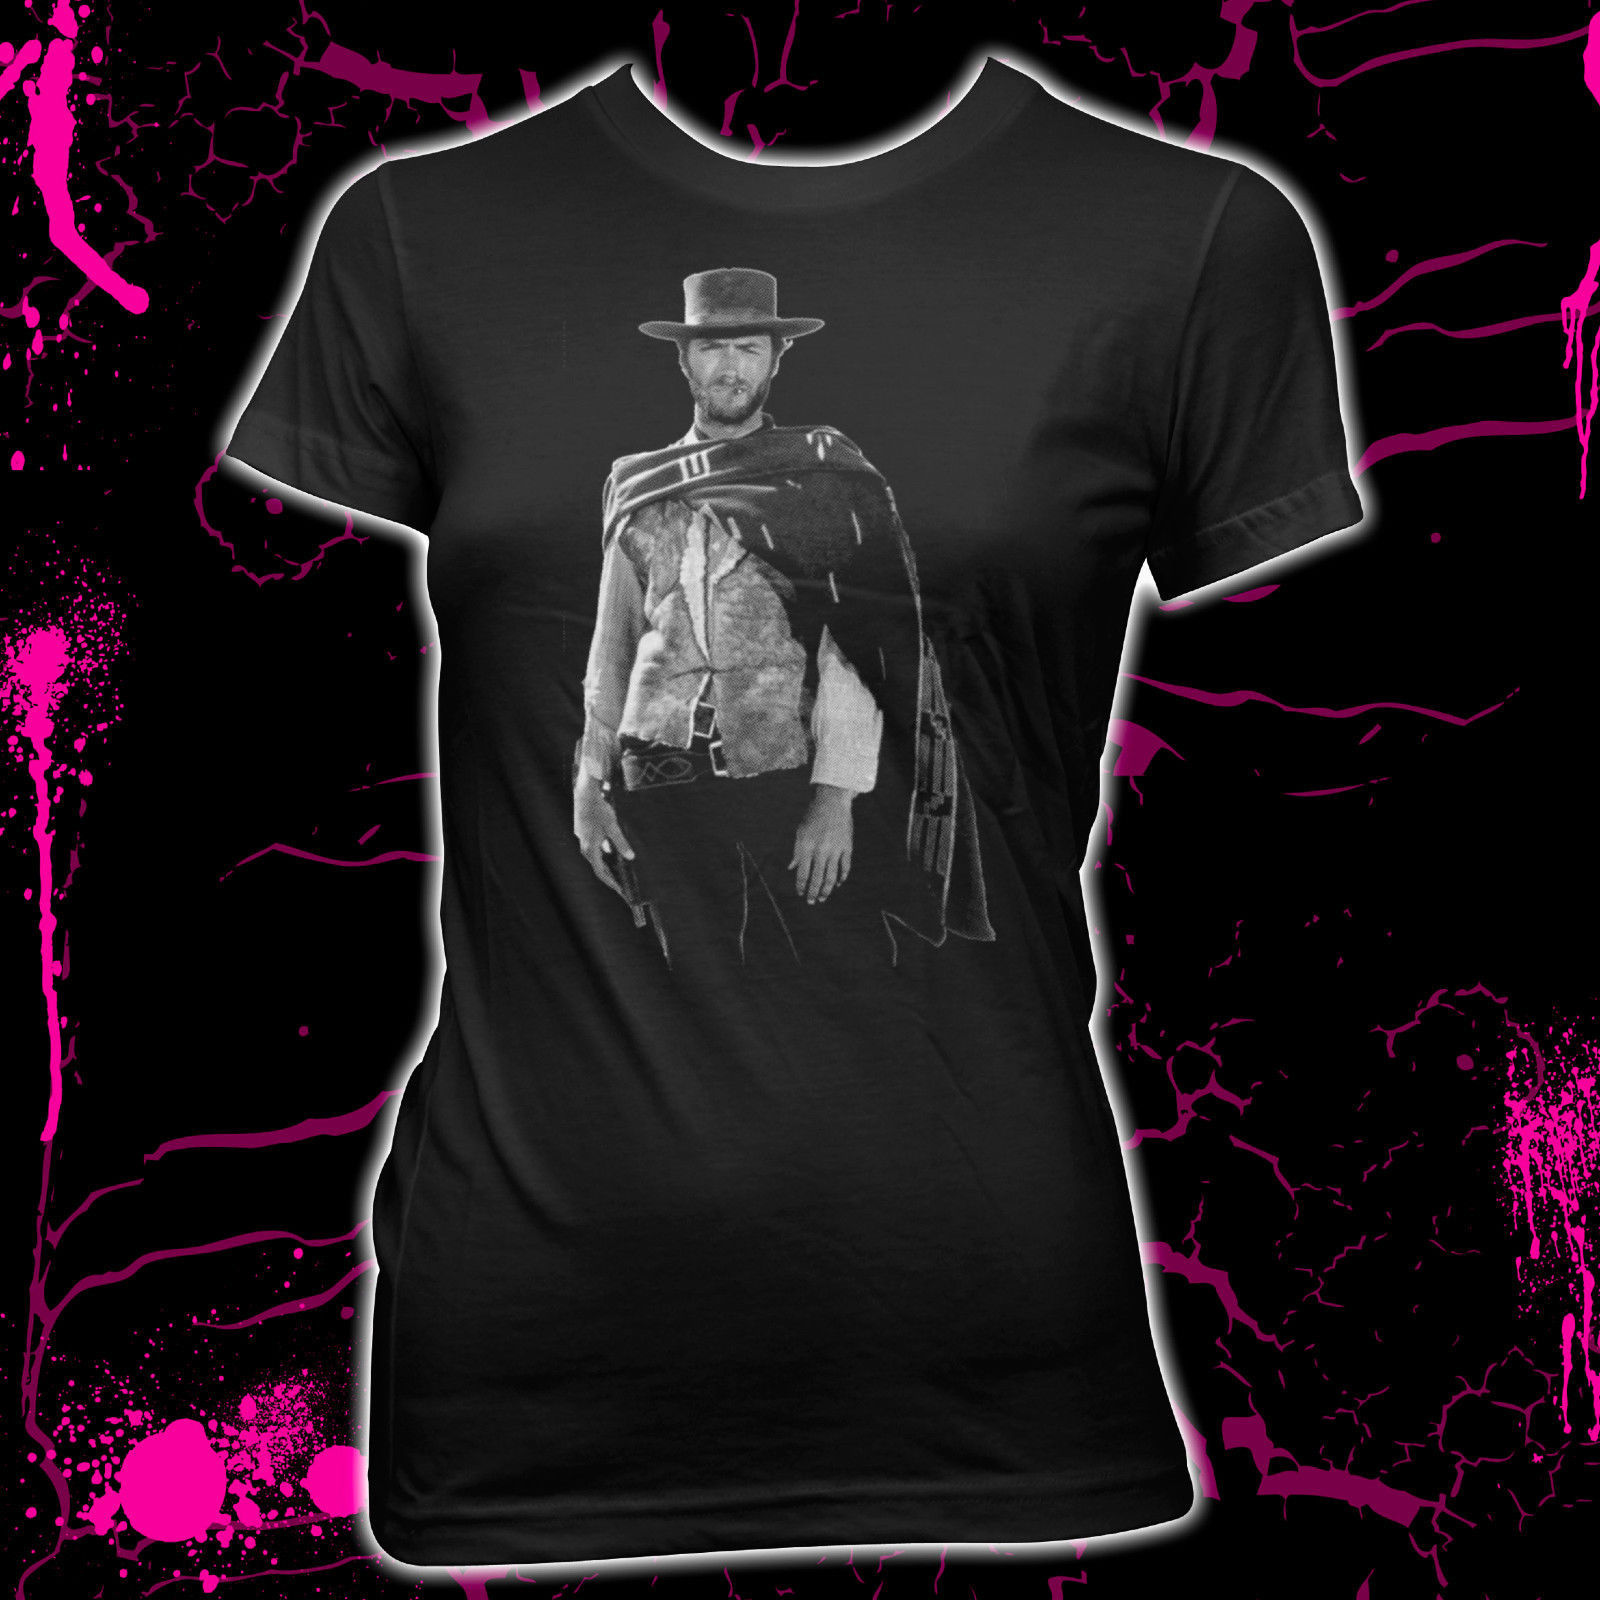 Clint Eastwood - The Man with No Name - Women's Pre-Shrunk, 100% Cotton T-Shirt